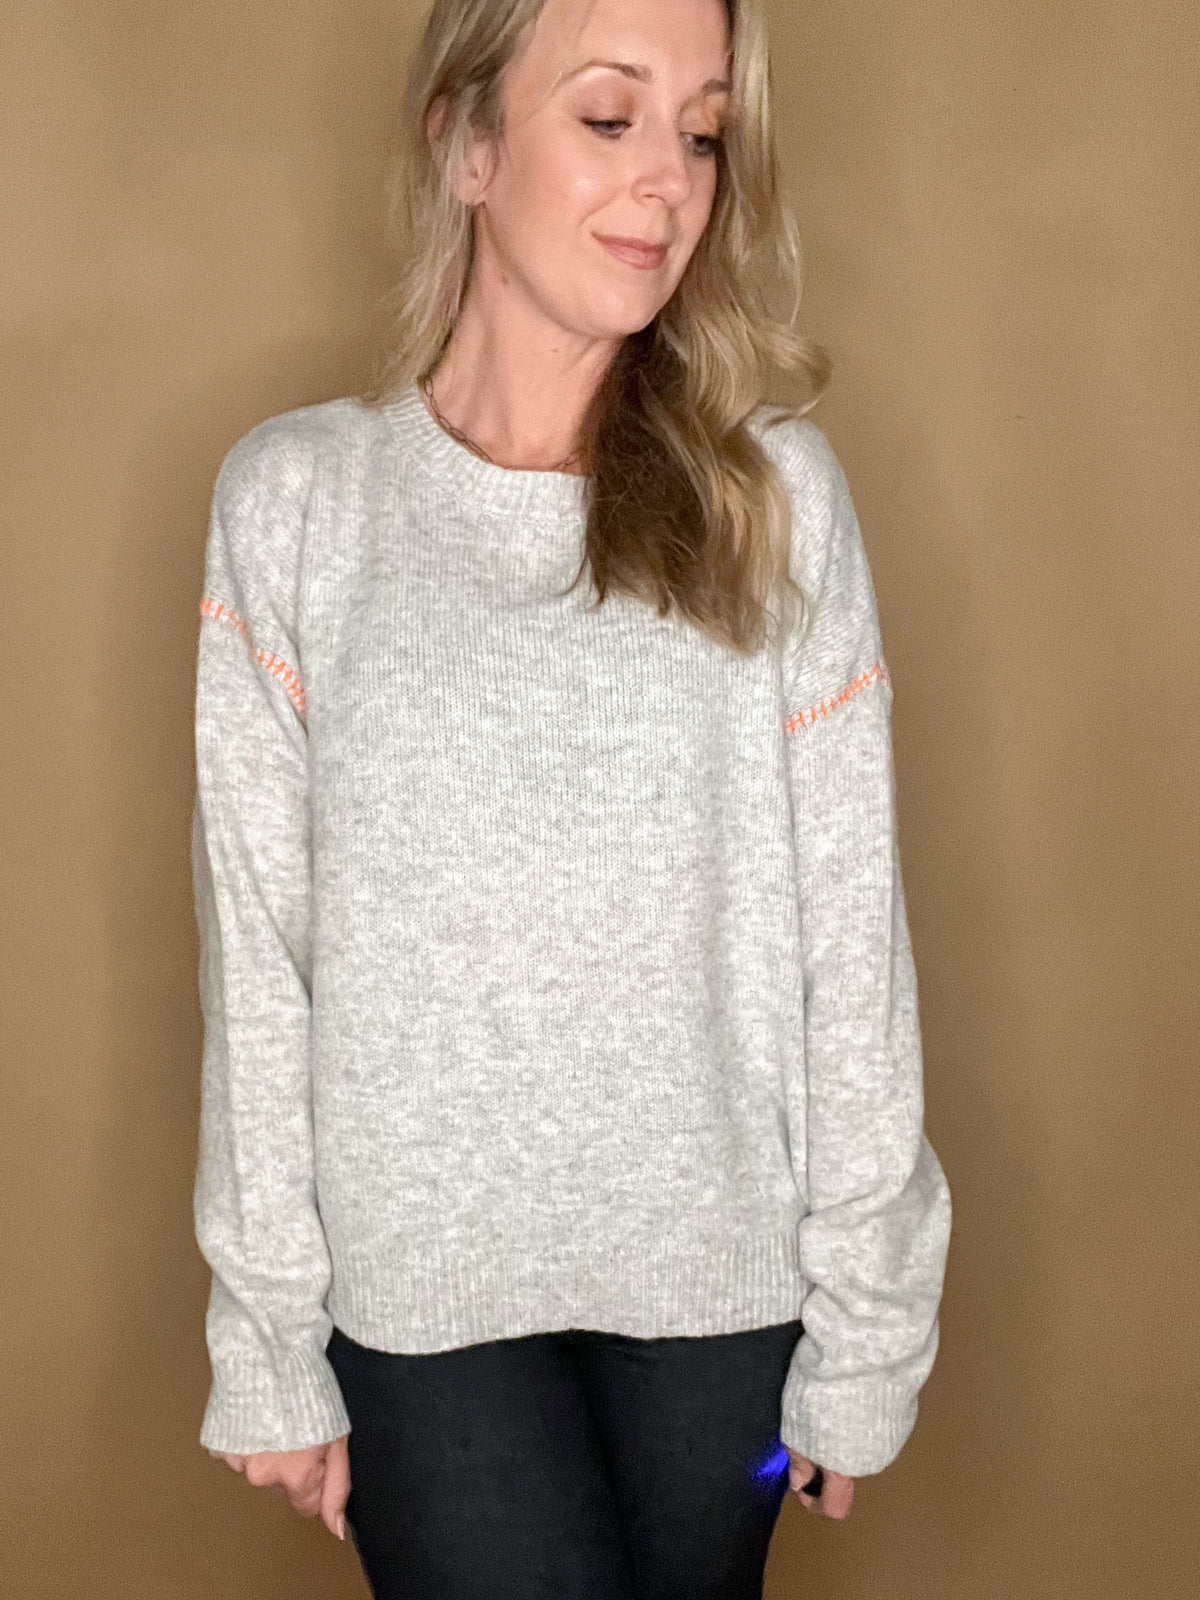 This Pop of Orange Sweater will make a chic statement this season. Its soft gray hue and exquisite orange stitching create a cozy yet refined look perfect for any occasion. The slightly oversized silhouette adds effortless elegance to your wardrobe.